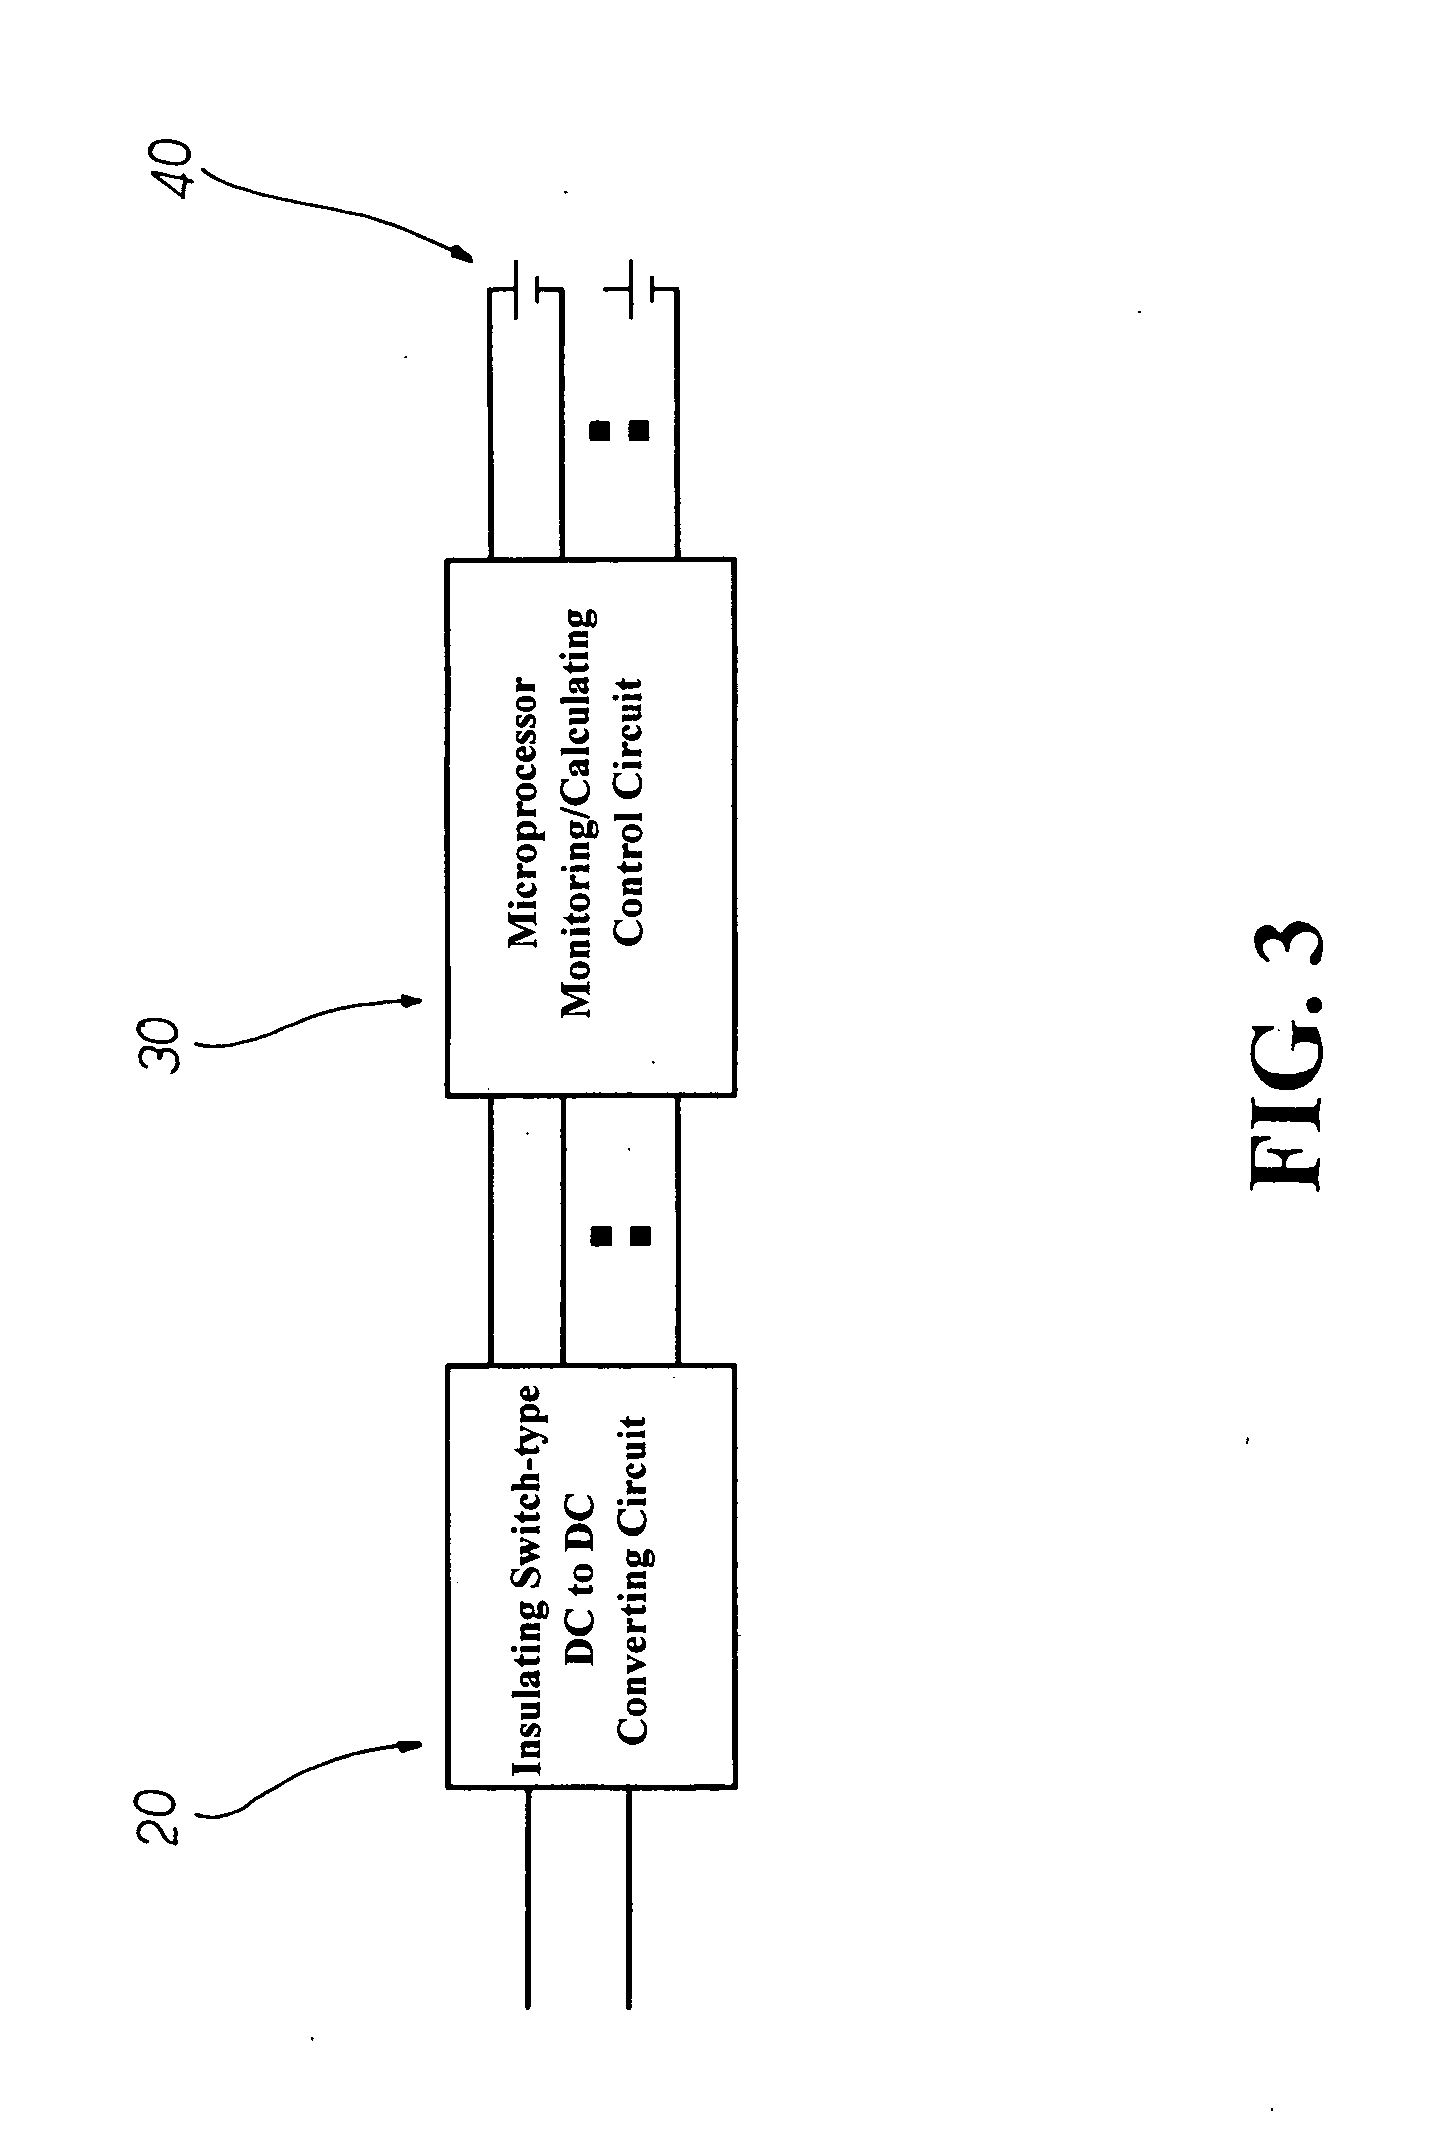 Intelligent equalizing battery charger having equalization charging circuitry